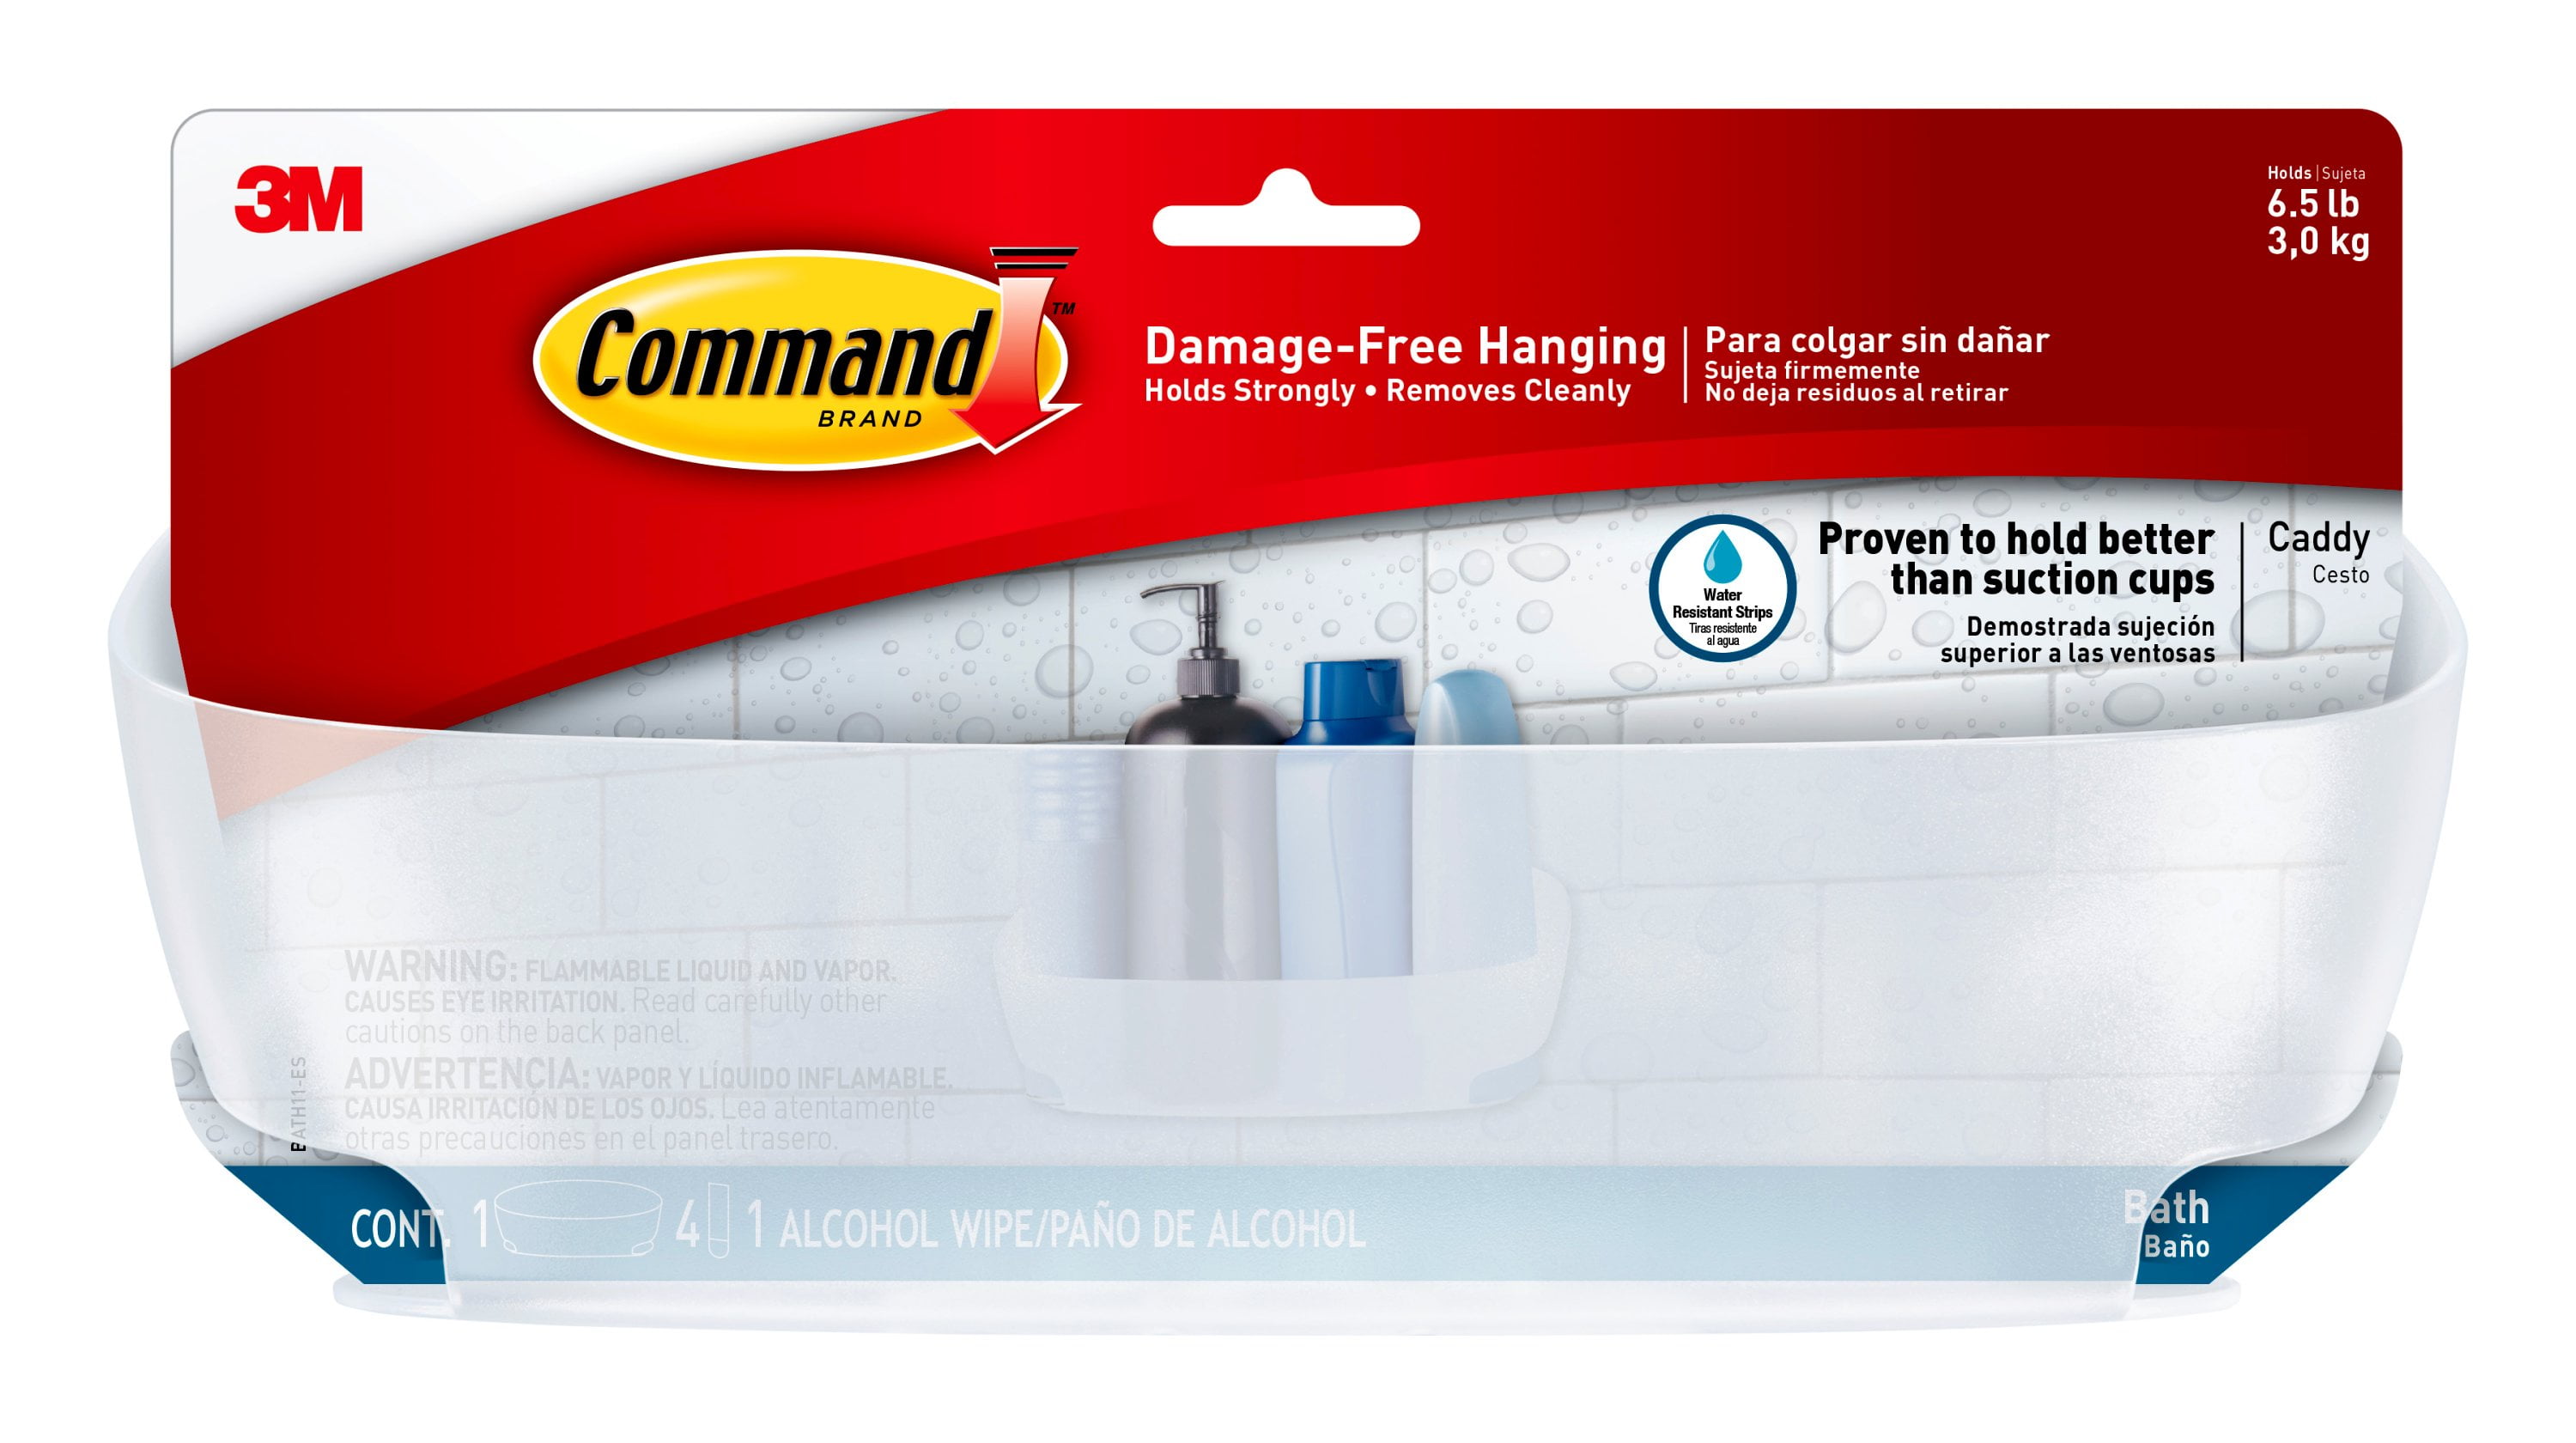 Command Bathroom Caddy Hanger BATH19-ES - Wilsons - Import, distribution  and wholesale of branded household, hardware and DIY products